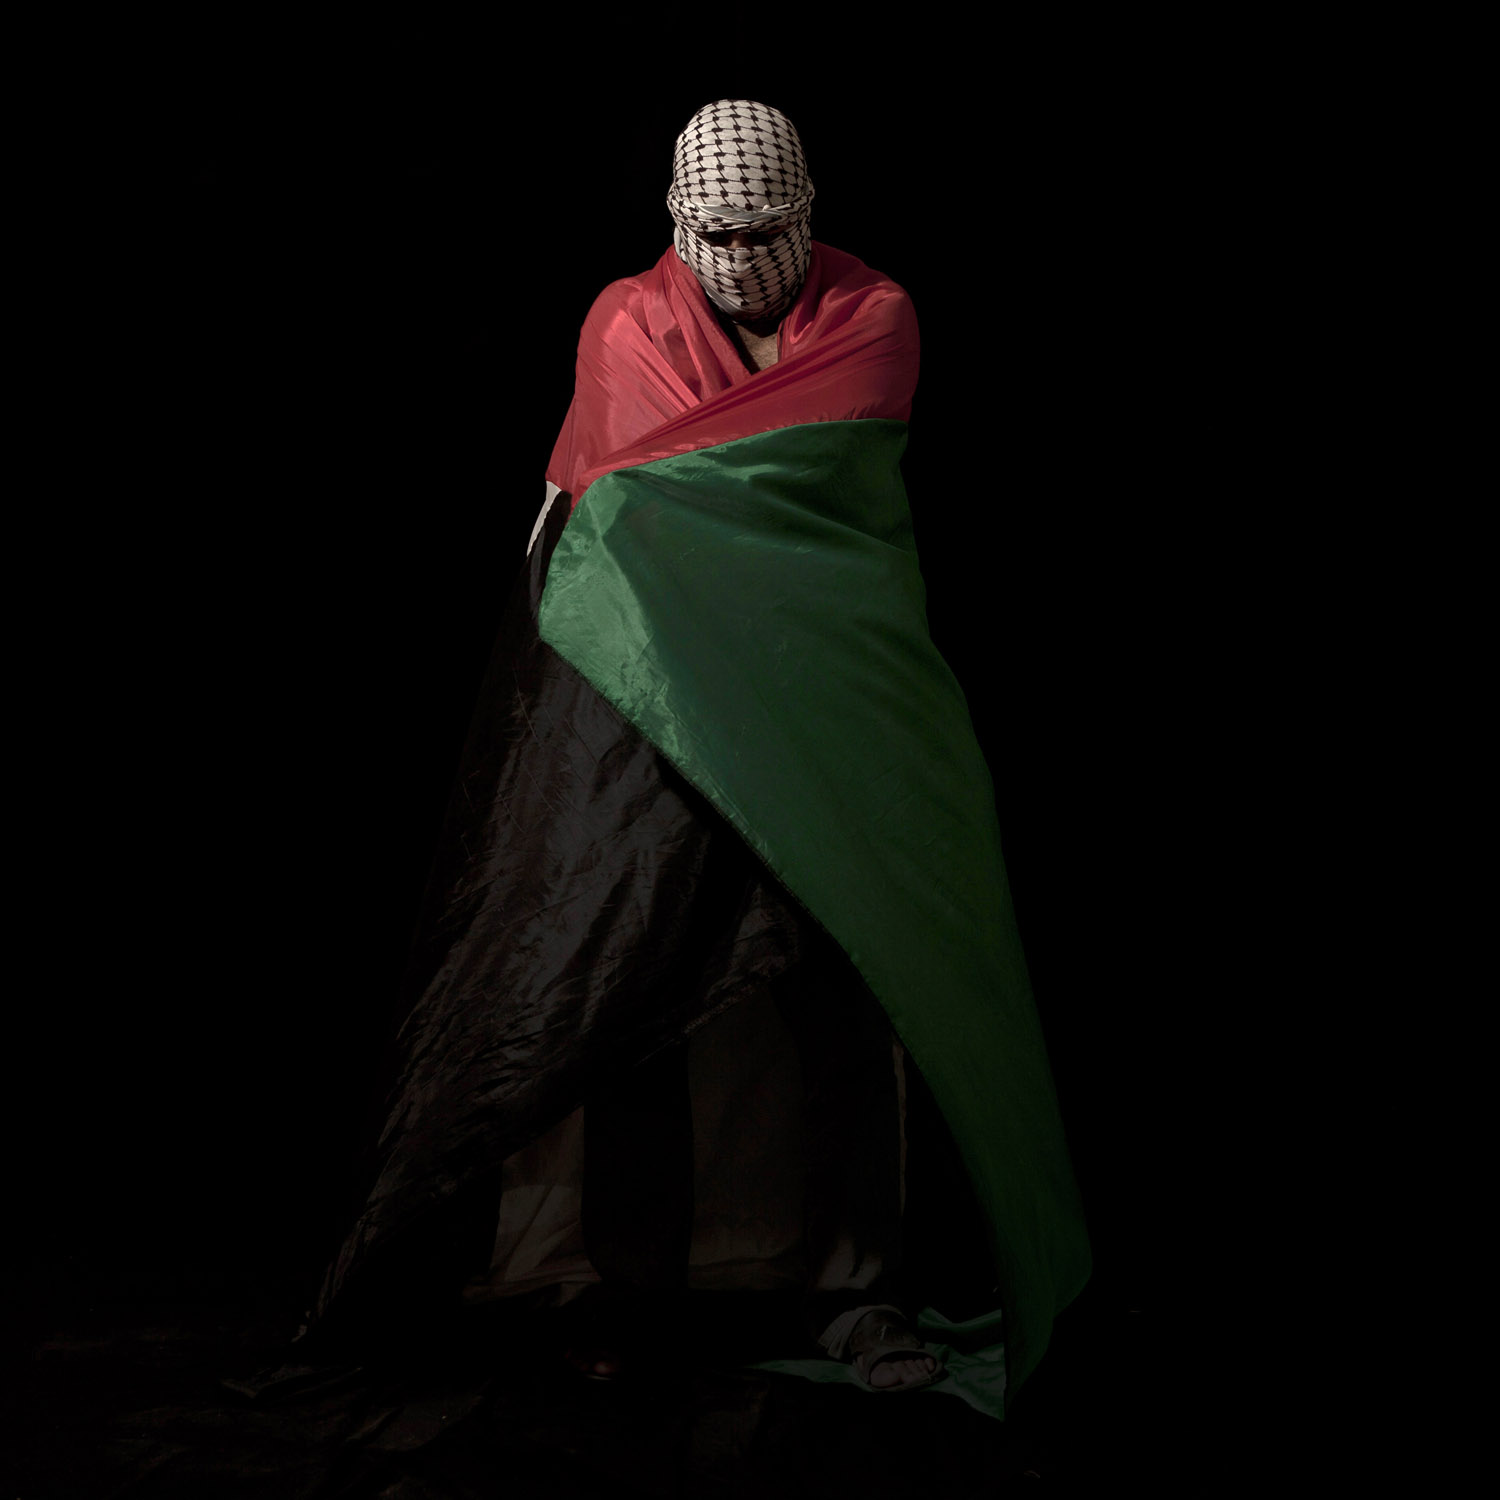 Portrait of a Palestinian stone thrower in the West Bank village of Bilin, near Ramallah. June 13, 2012.